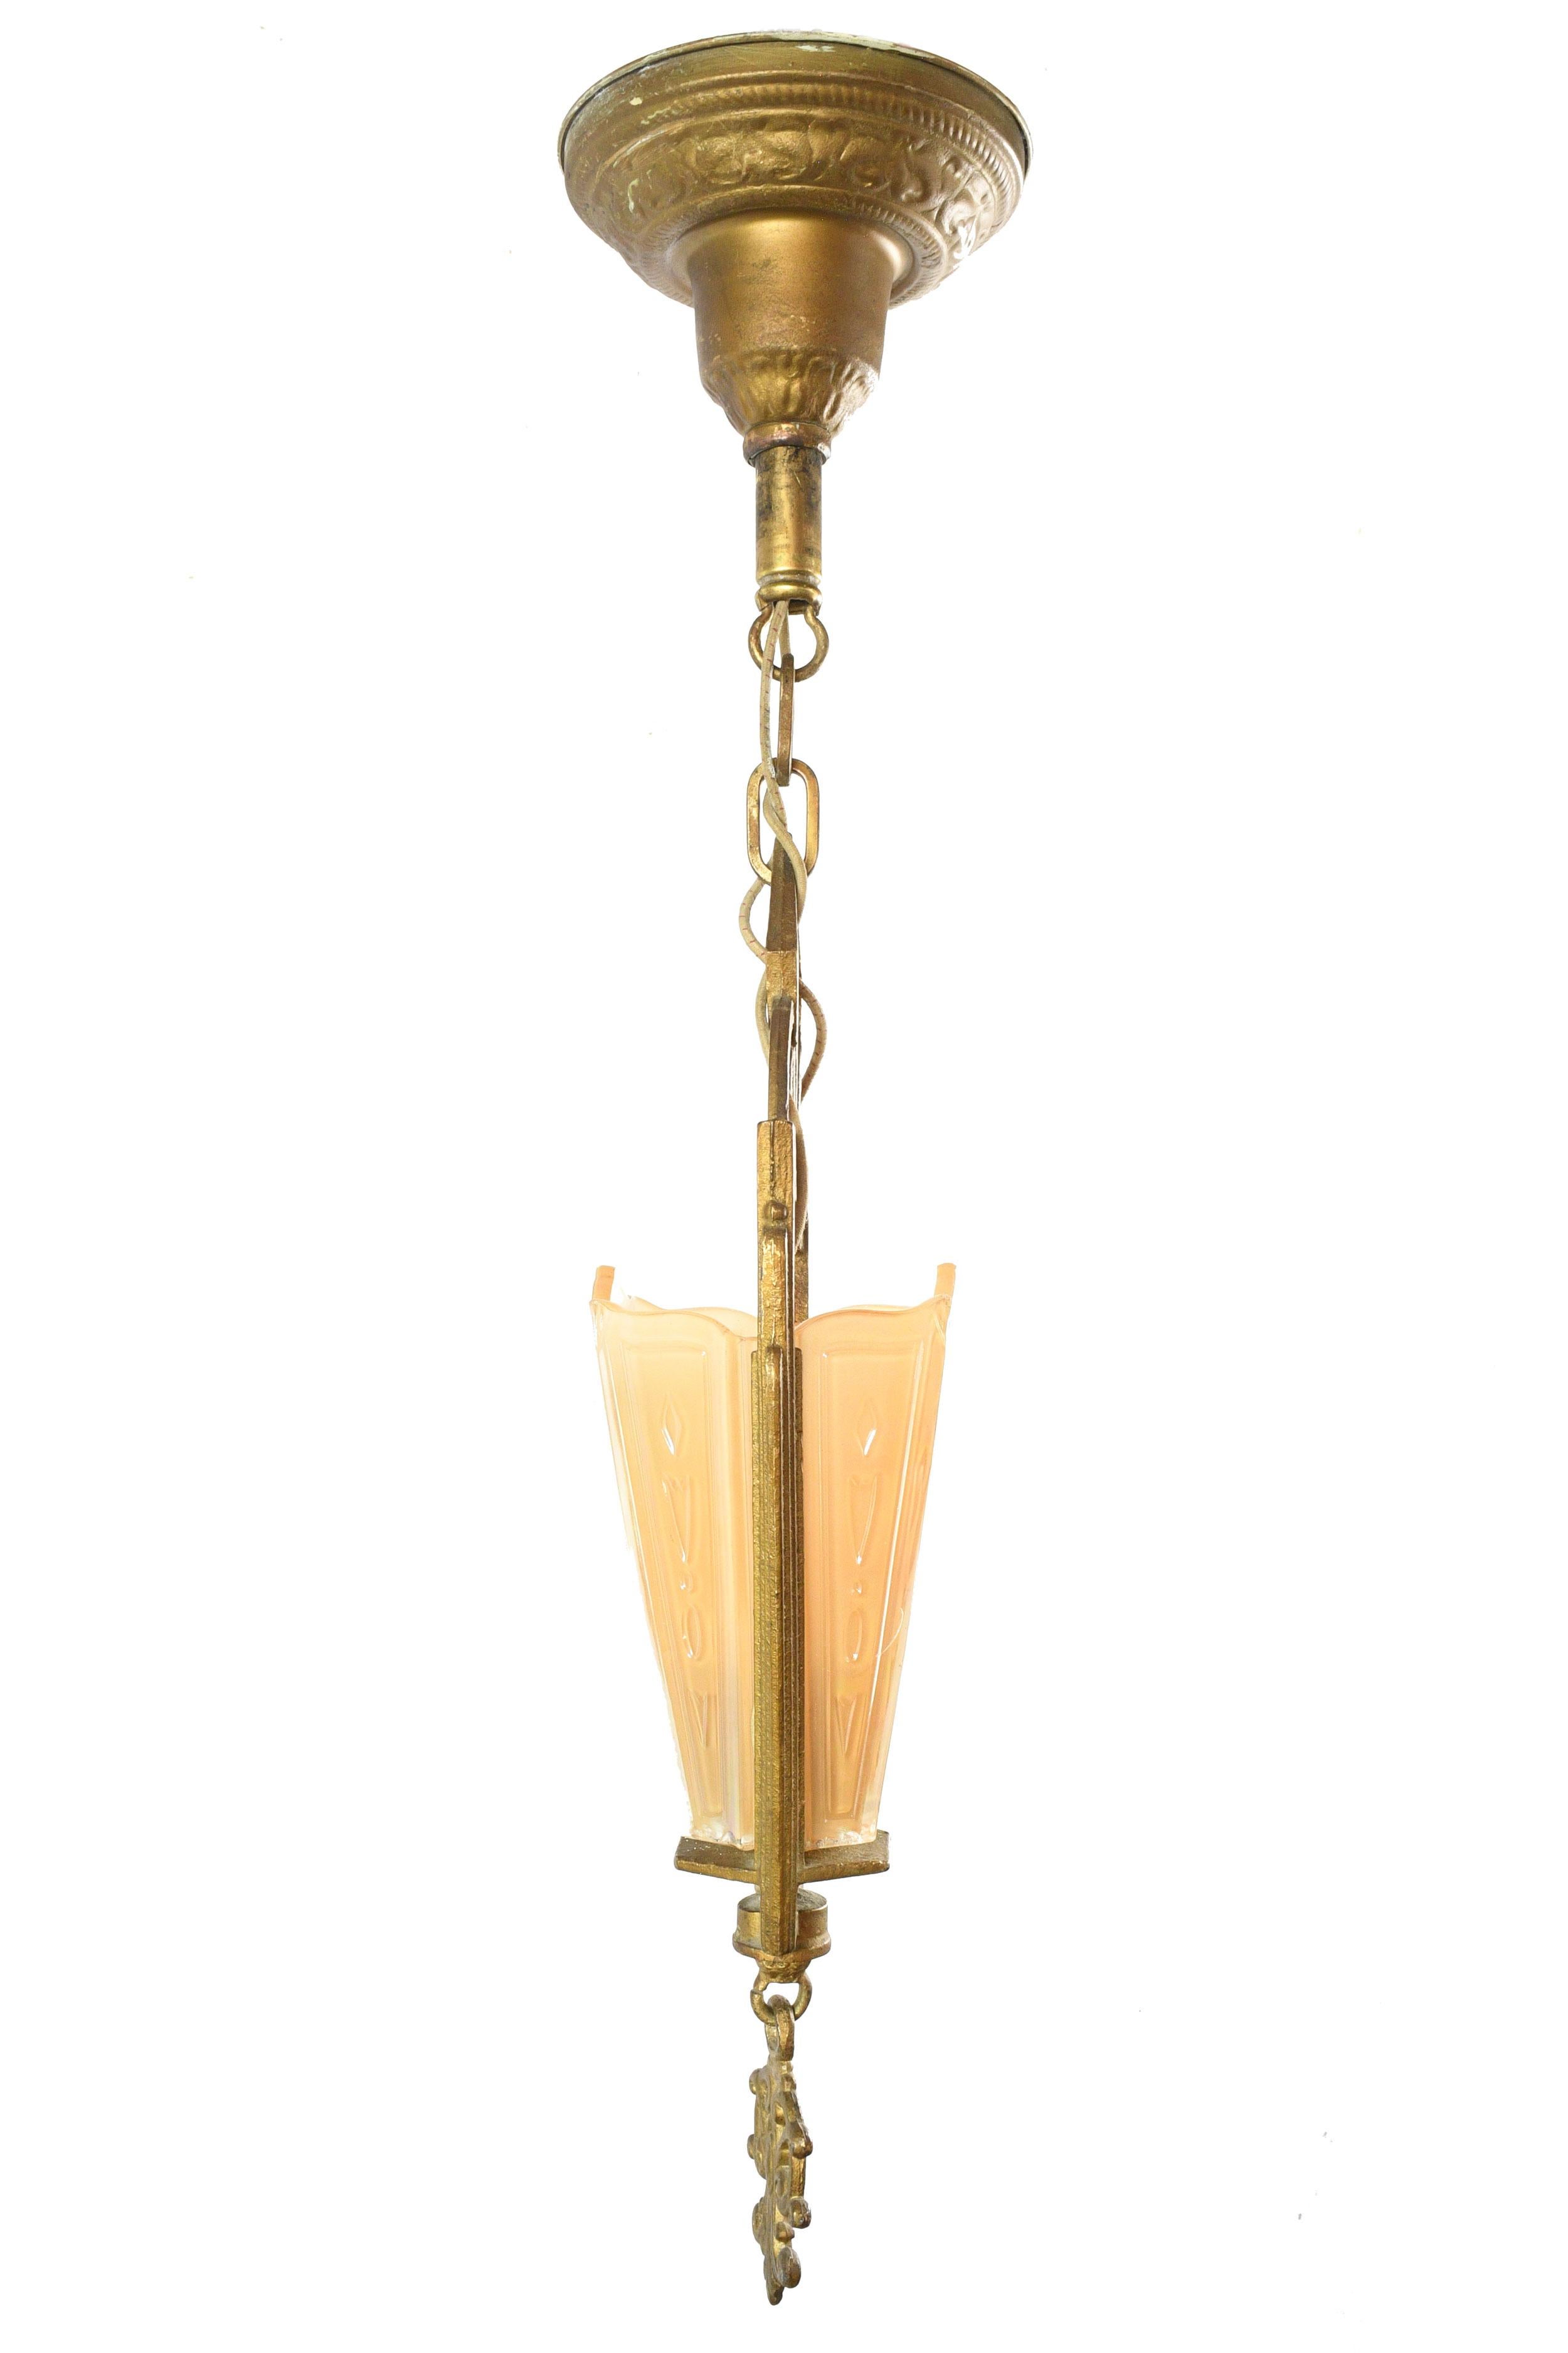 This precious single candle Art Deco pendant made by Markel Company, well known for their Art Deco and Art Nouveau slipper shade chandeliers and sconces. A nude/peach coloured iridescent shade sits delicately in a geometric Art Deco frame with a